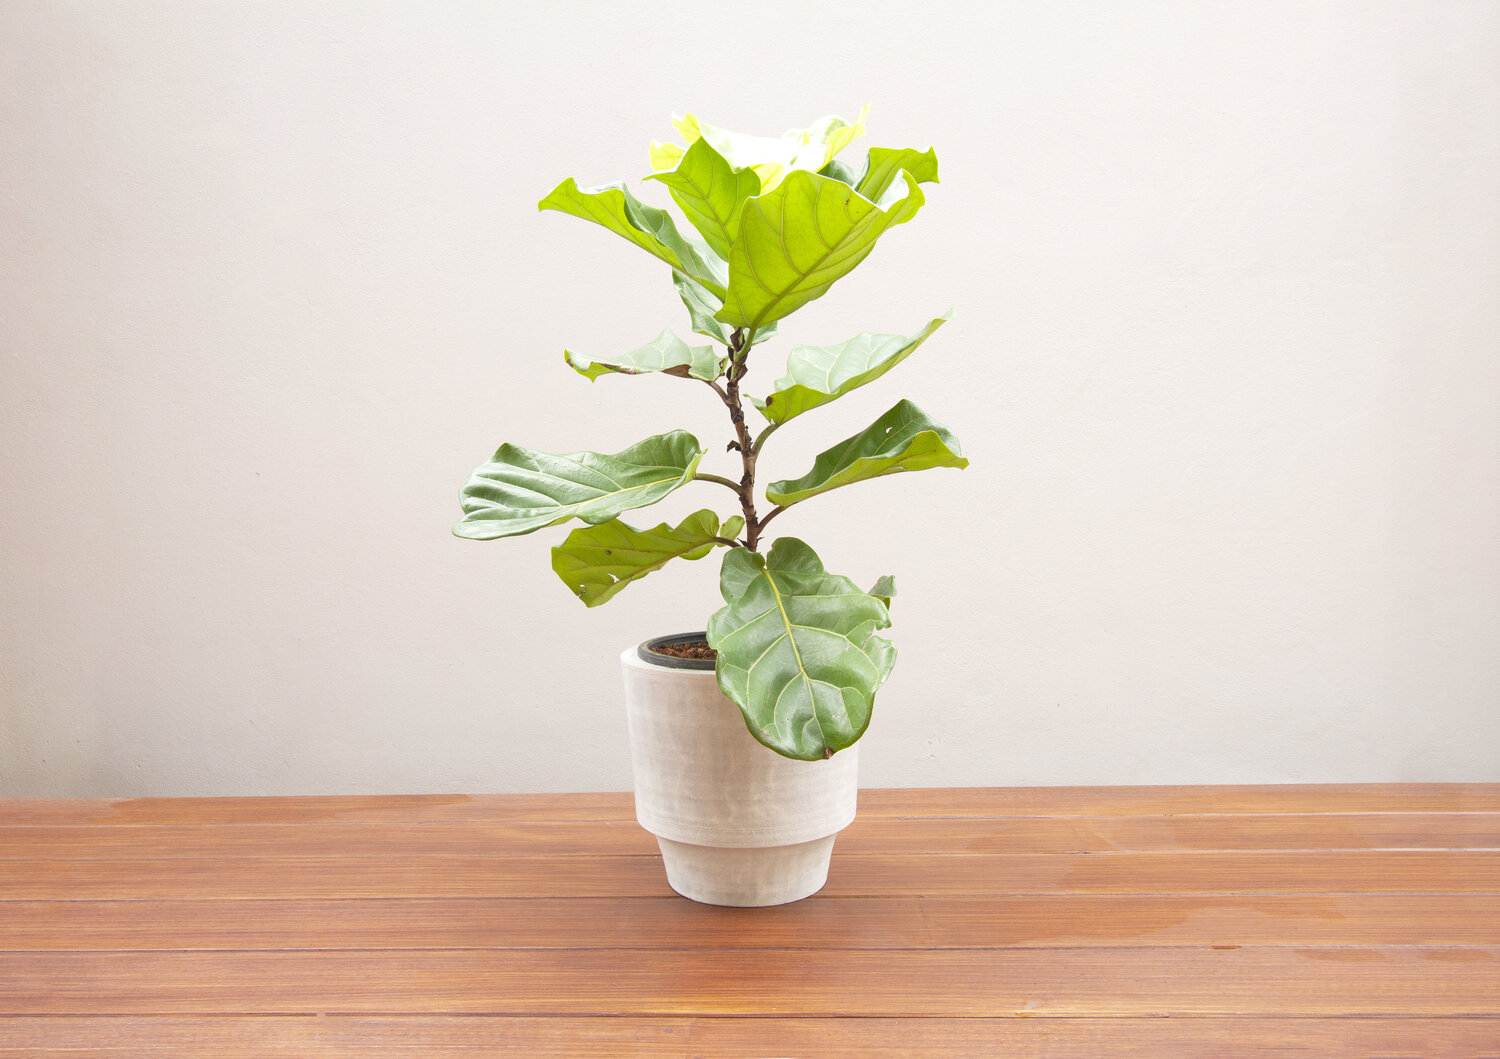 The best way to repot your Fiddle Leaf Fig